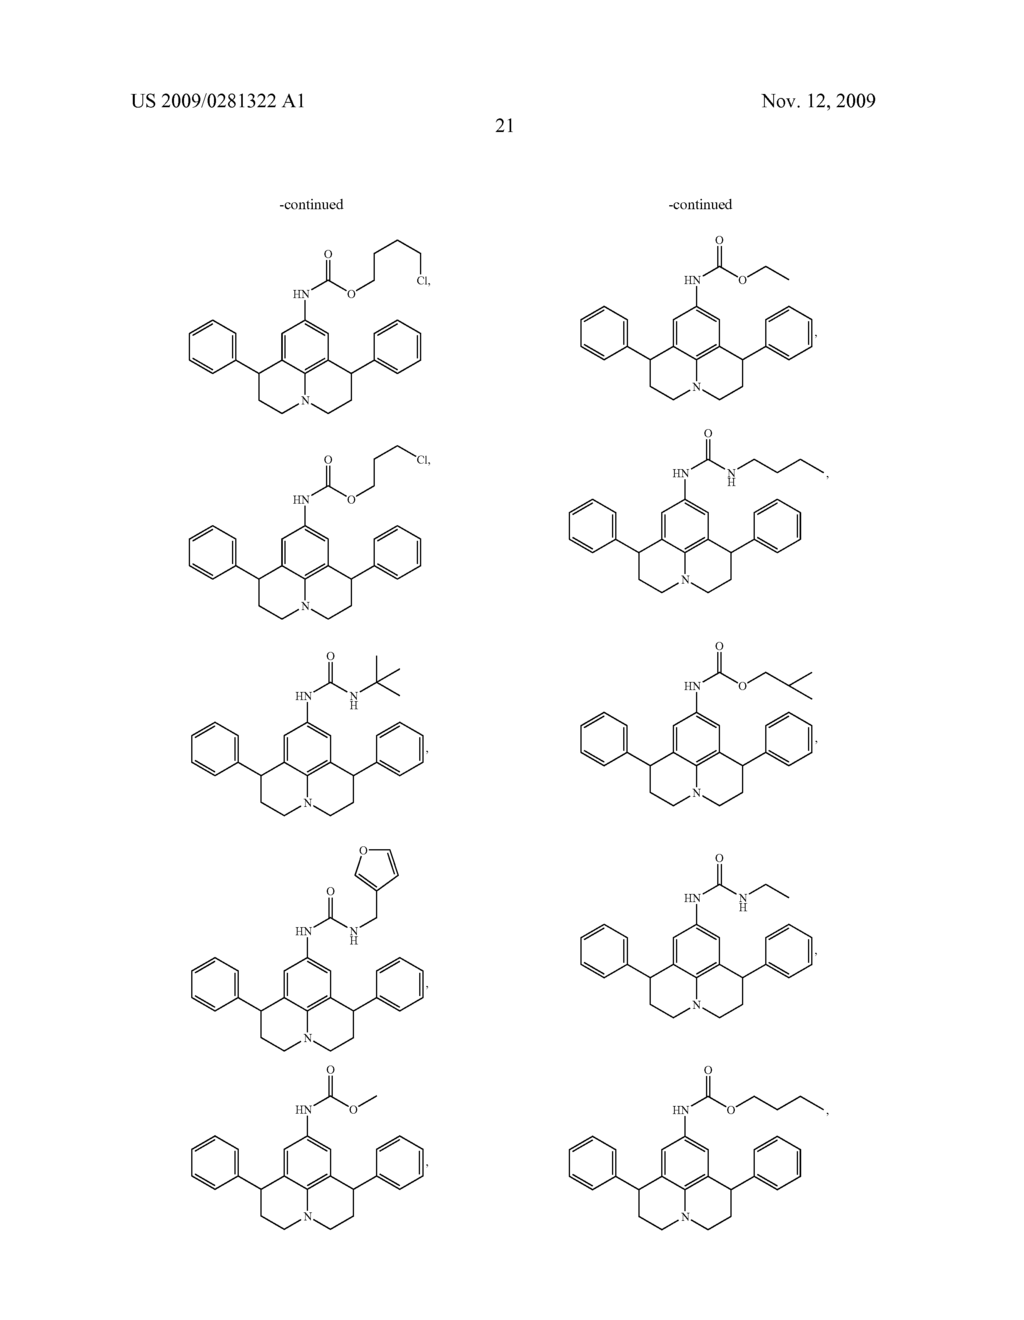 THERAPEUTICALLY USEFUL SUBSTITUTED 1,7-DIPHENYL-1,2,3,5,6,7-HEXAHYDROPYRIDO[3,2,1-Ij]QUINOLINE COMPOUNDS - diagram, schematic, and image 22